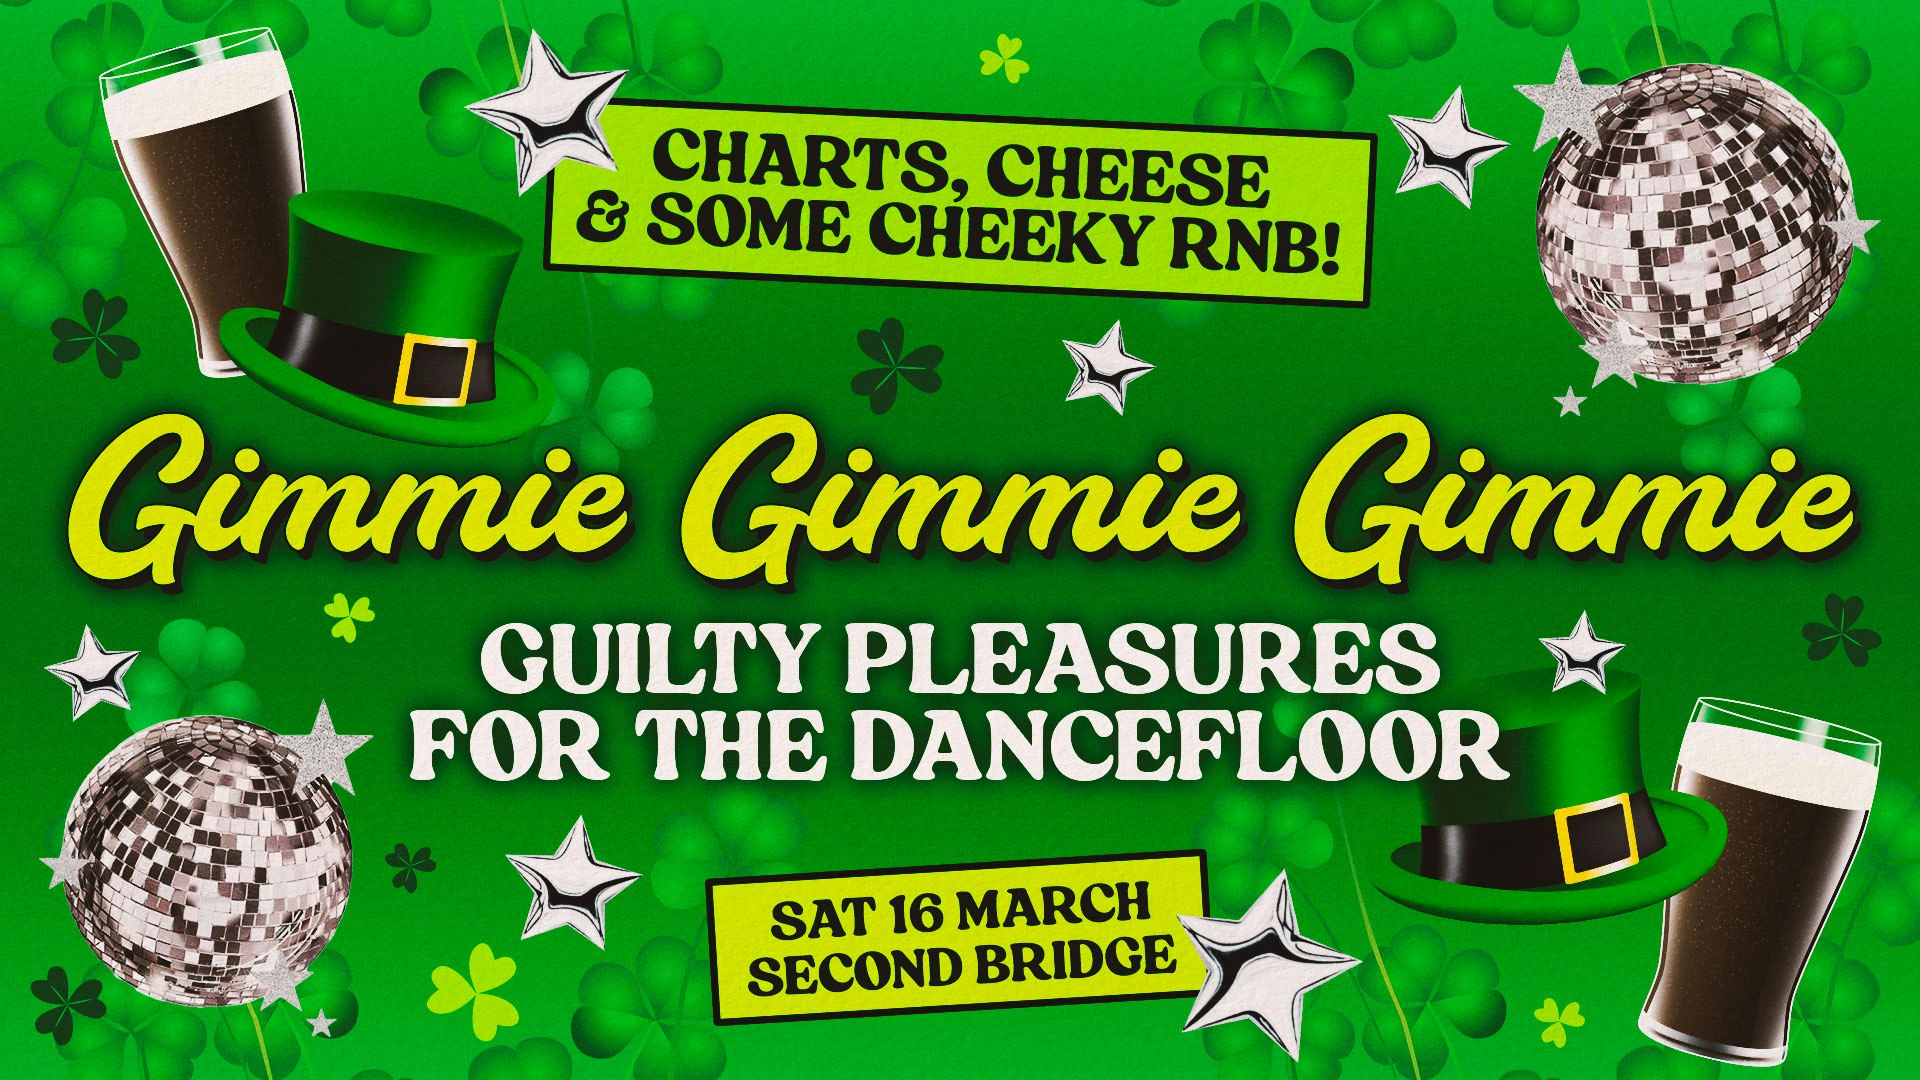 Paddy’s Day Special – [£1 TICKETS] GIMMIE GIMMIE GIMMIE: Guilty Dancefloor Pleasures